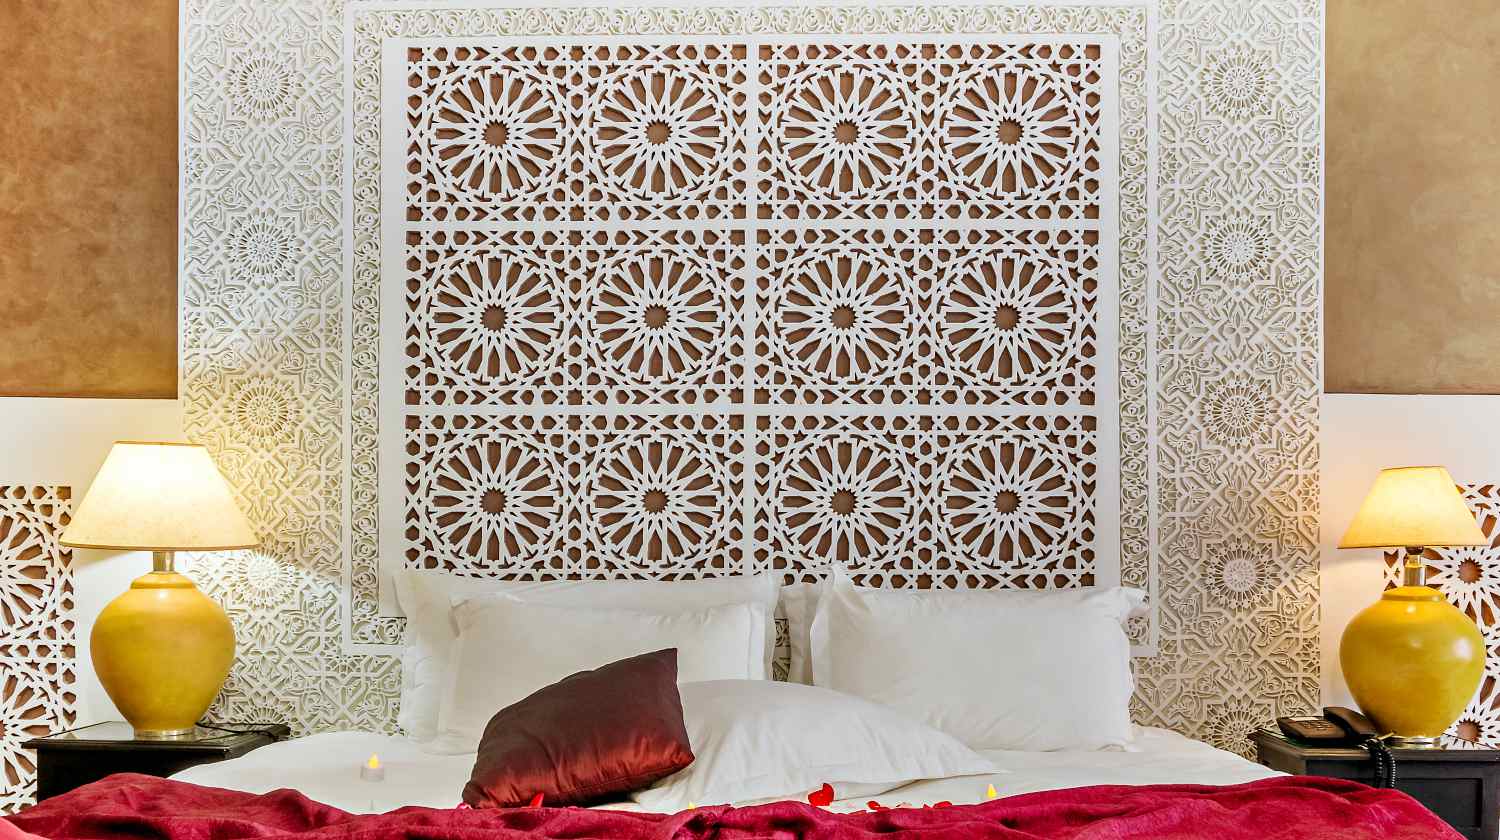 Beautiful hotel bedroom with a carved headboard in Arabic style | DIY Headboards For Your Home And Bedroom Makeover | Featured